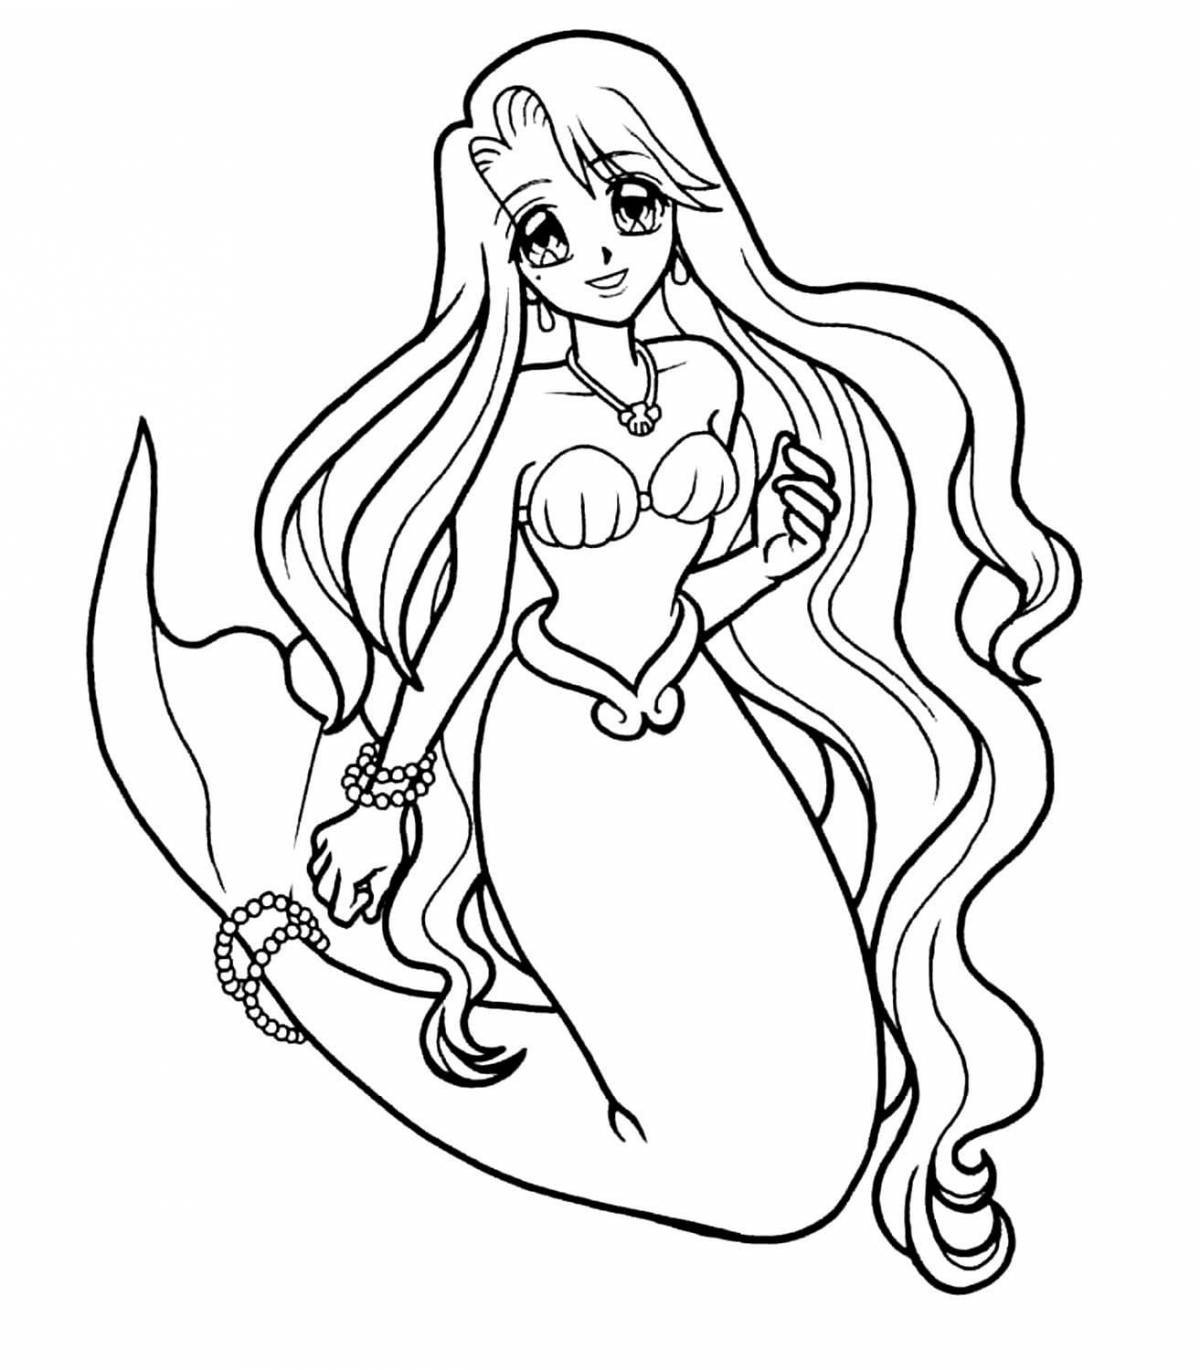 Whimsical mermaid coloring book for girls